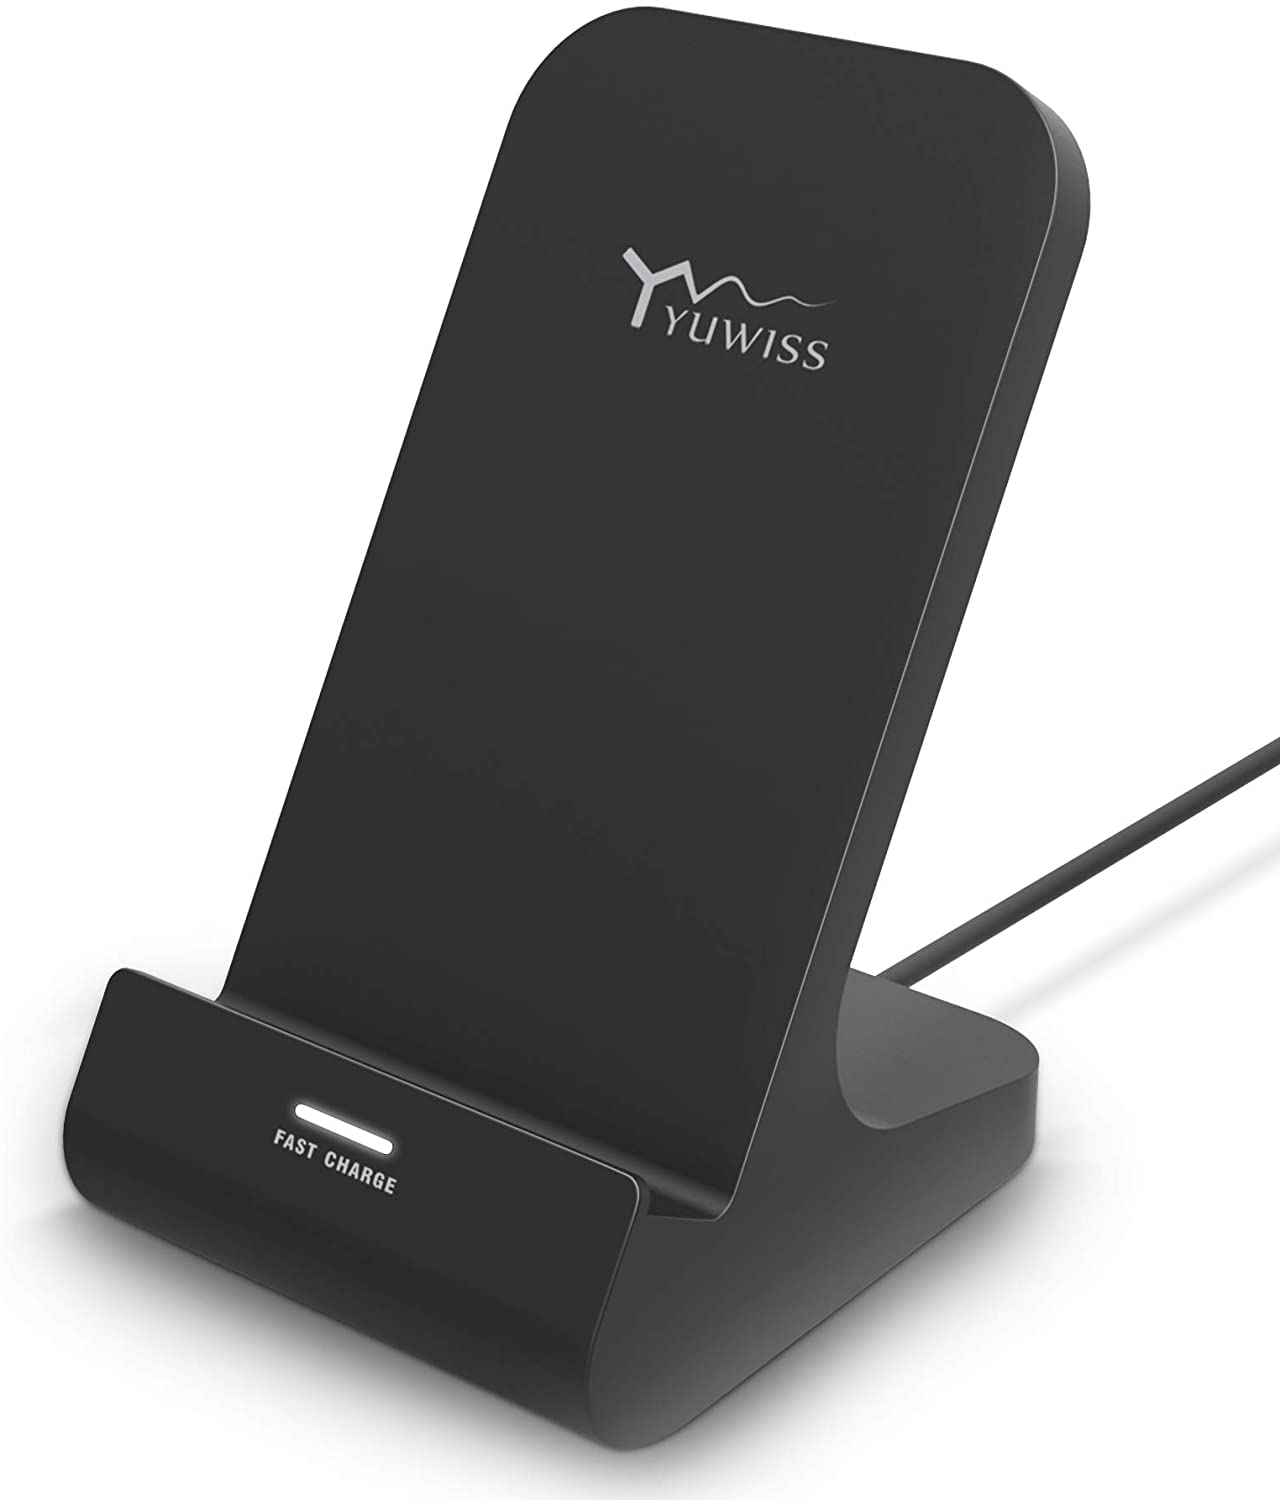 YW YUWISS Wireless Phone Charger Stand Qi-Certified 10W Max $7.9